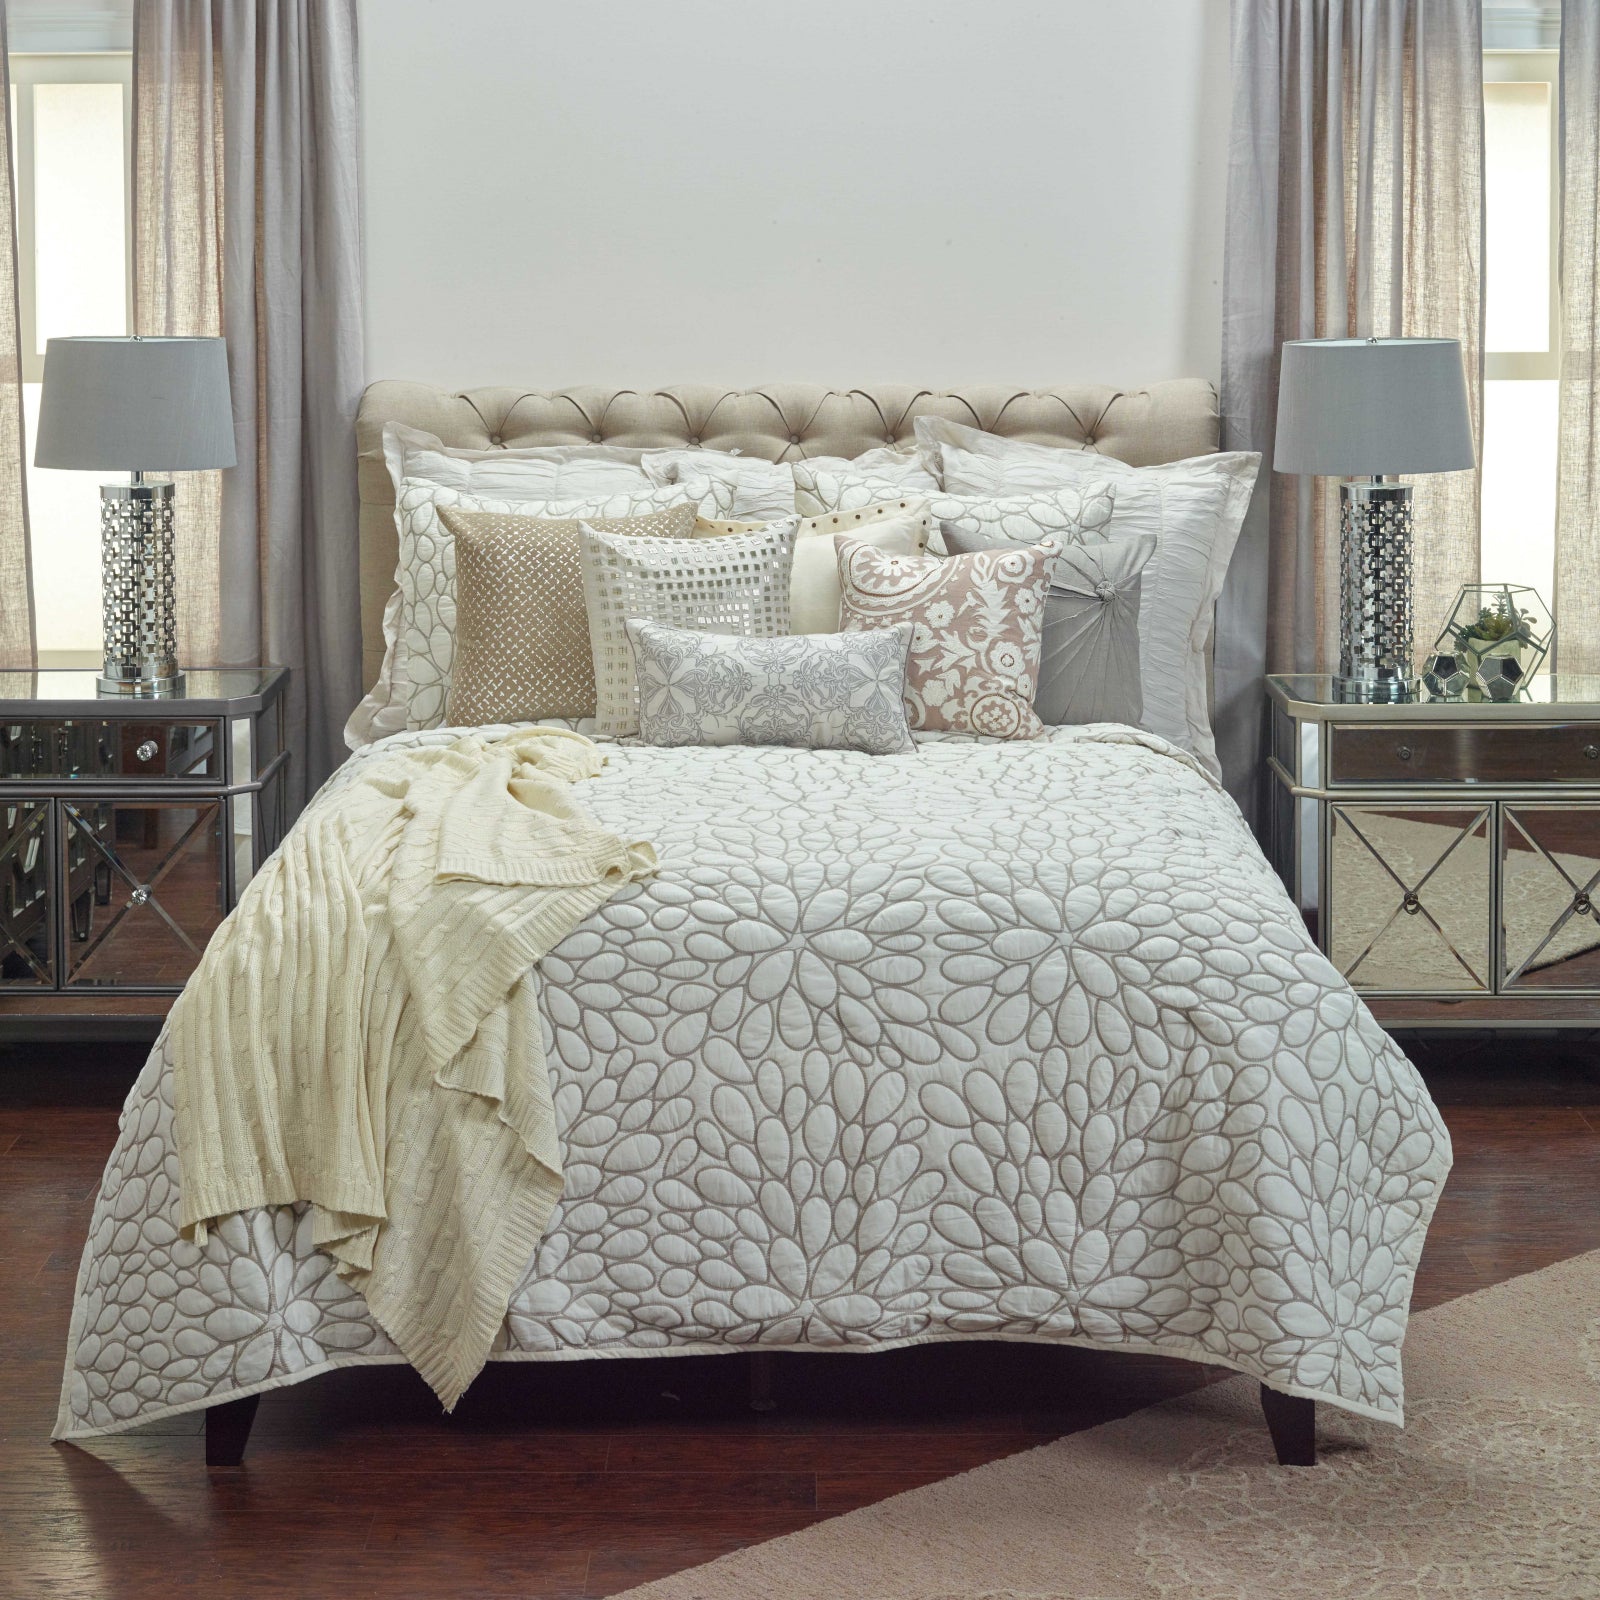 Rizzy BT4058 Petal Ivory Bedding main image